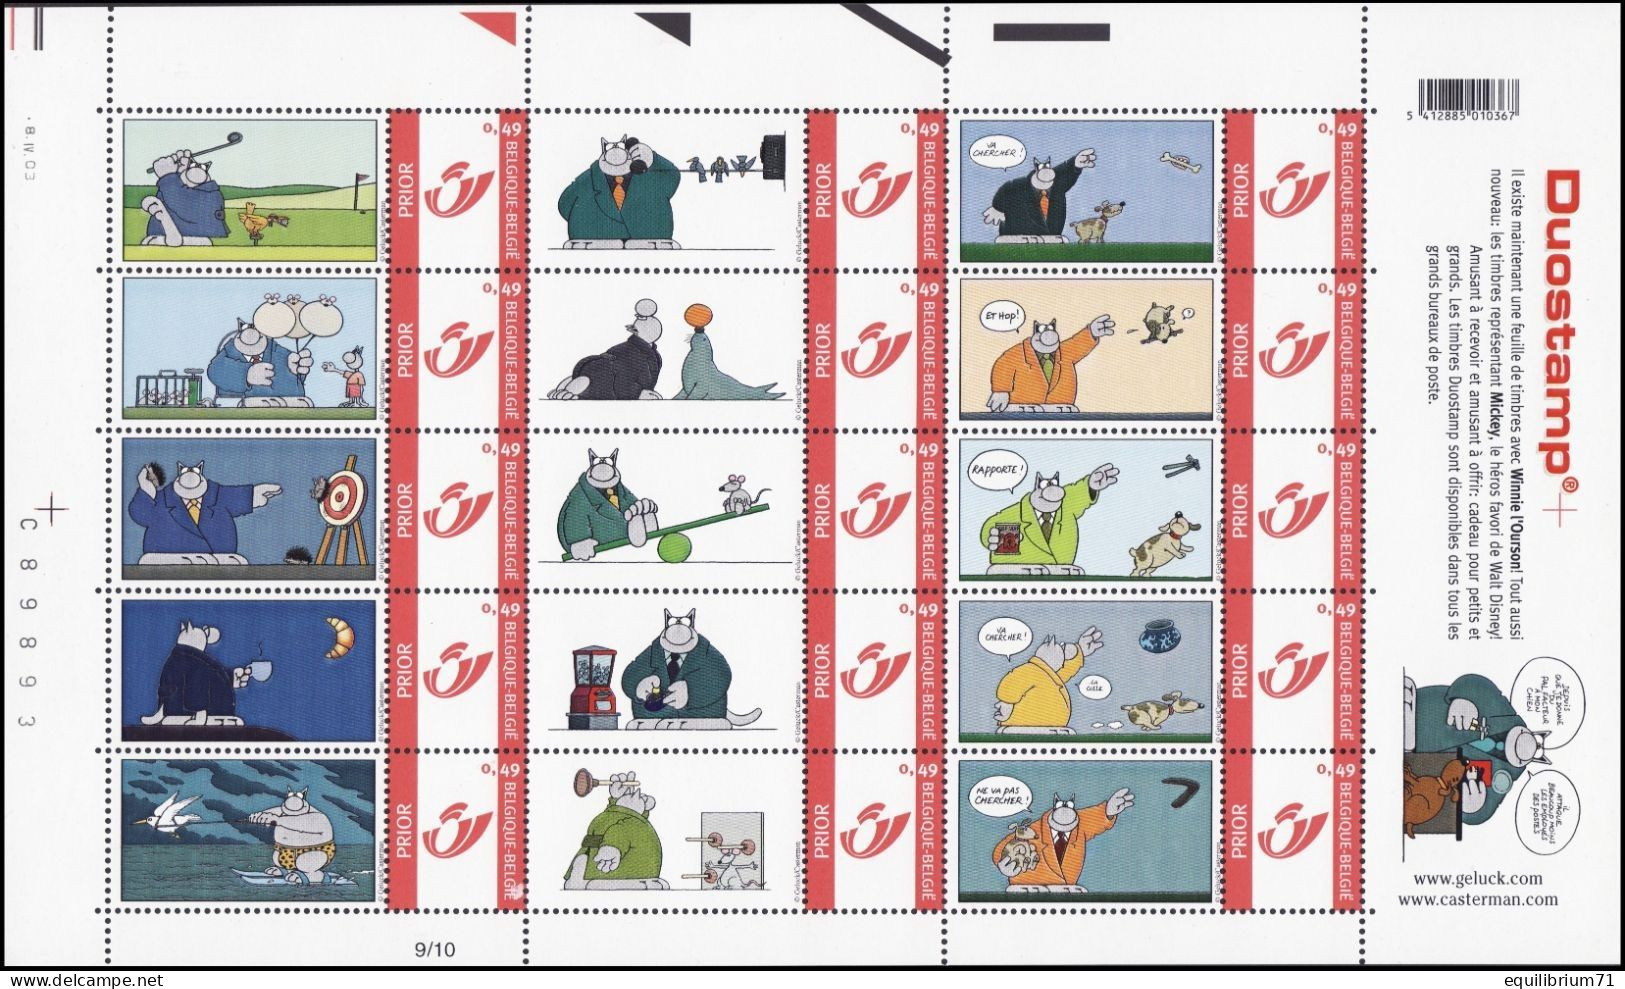 DUOSTAMP** / MYSTAMP** - Philippe Geluck - Le Chat - Feuille N°9/10 - Philabédés